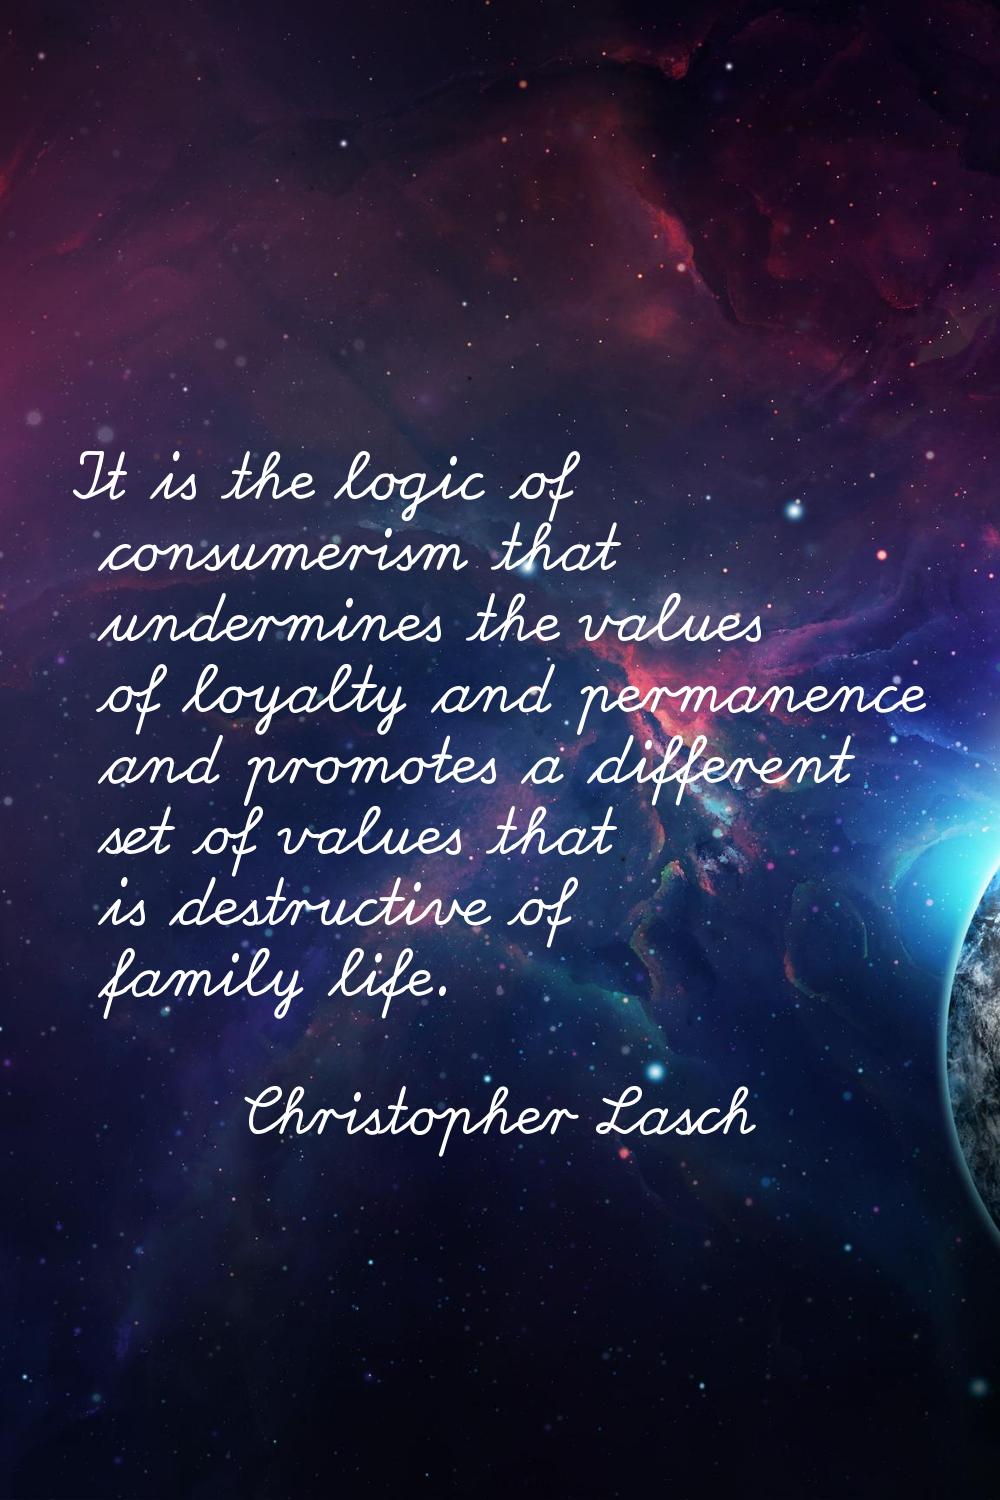 It is the logic of consumerism that undermines the values of loyalty and permanence and promotes a 